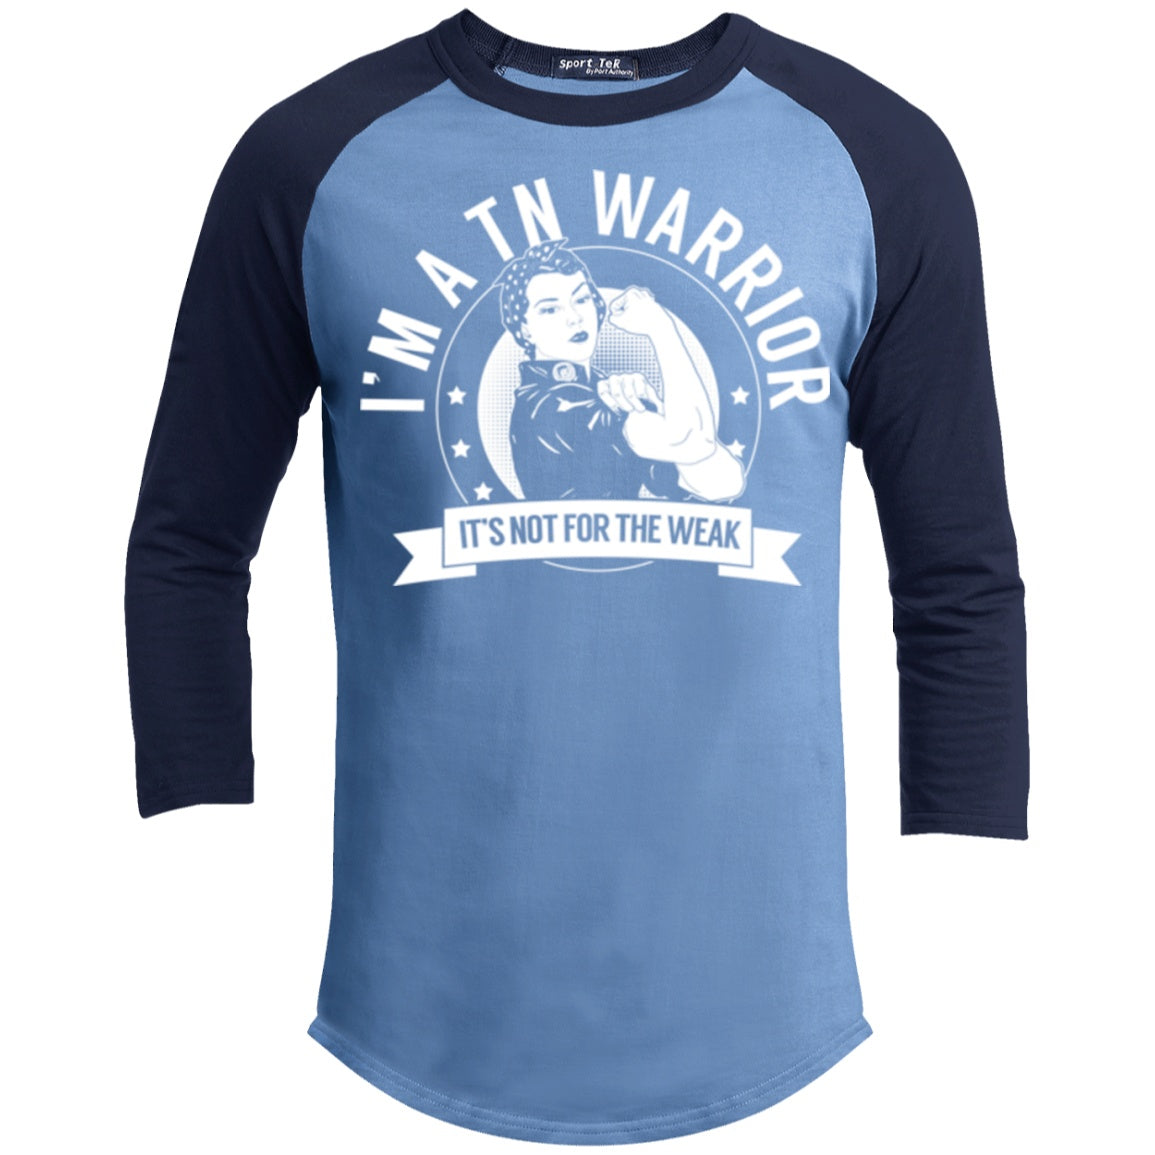 Trigeminal Neuralgia - TN Warrior Not For The Weak Baseball Shirt - The Unchargeables